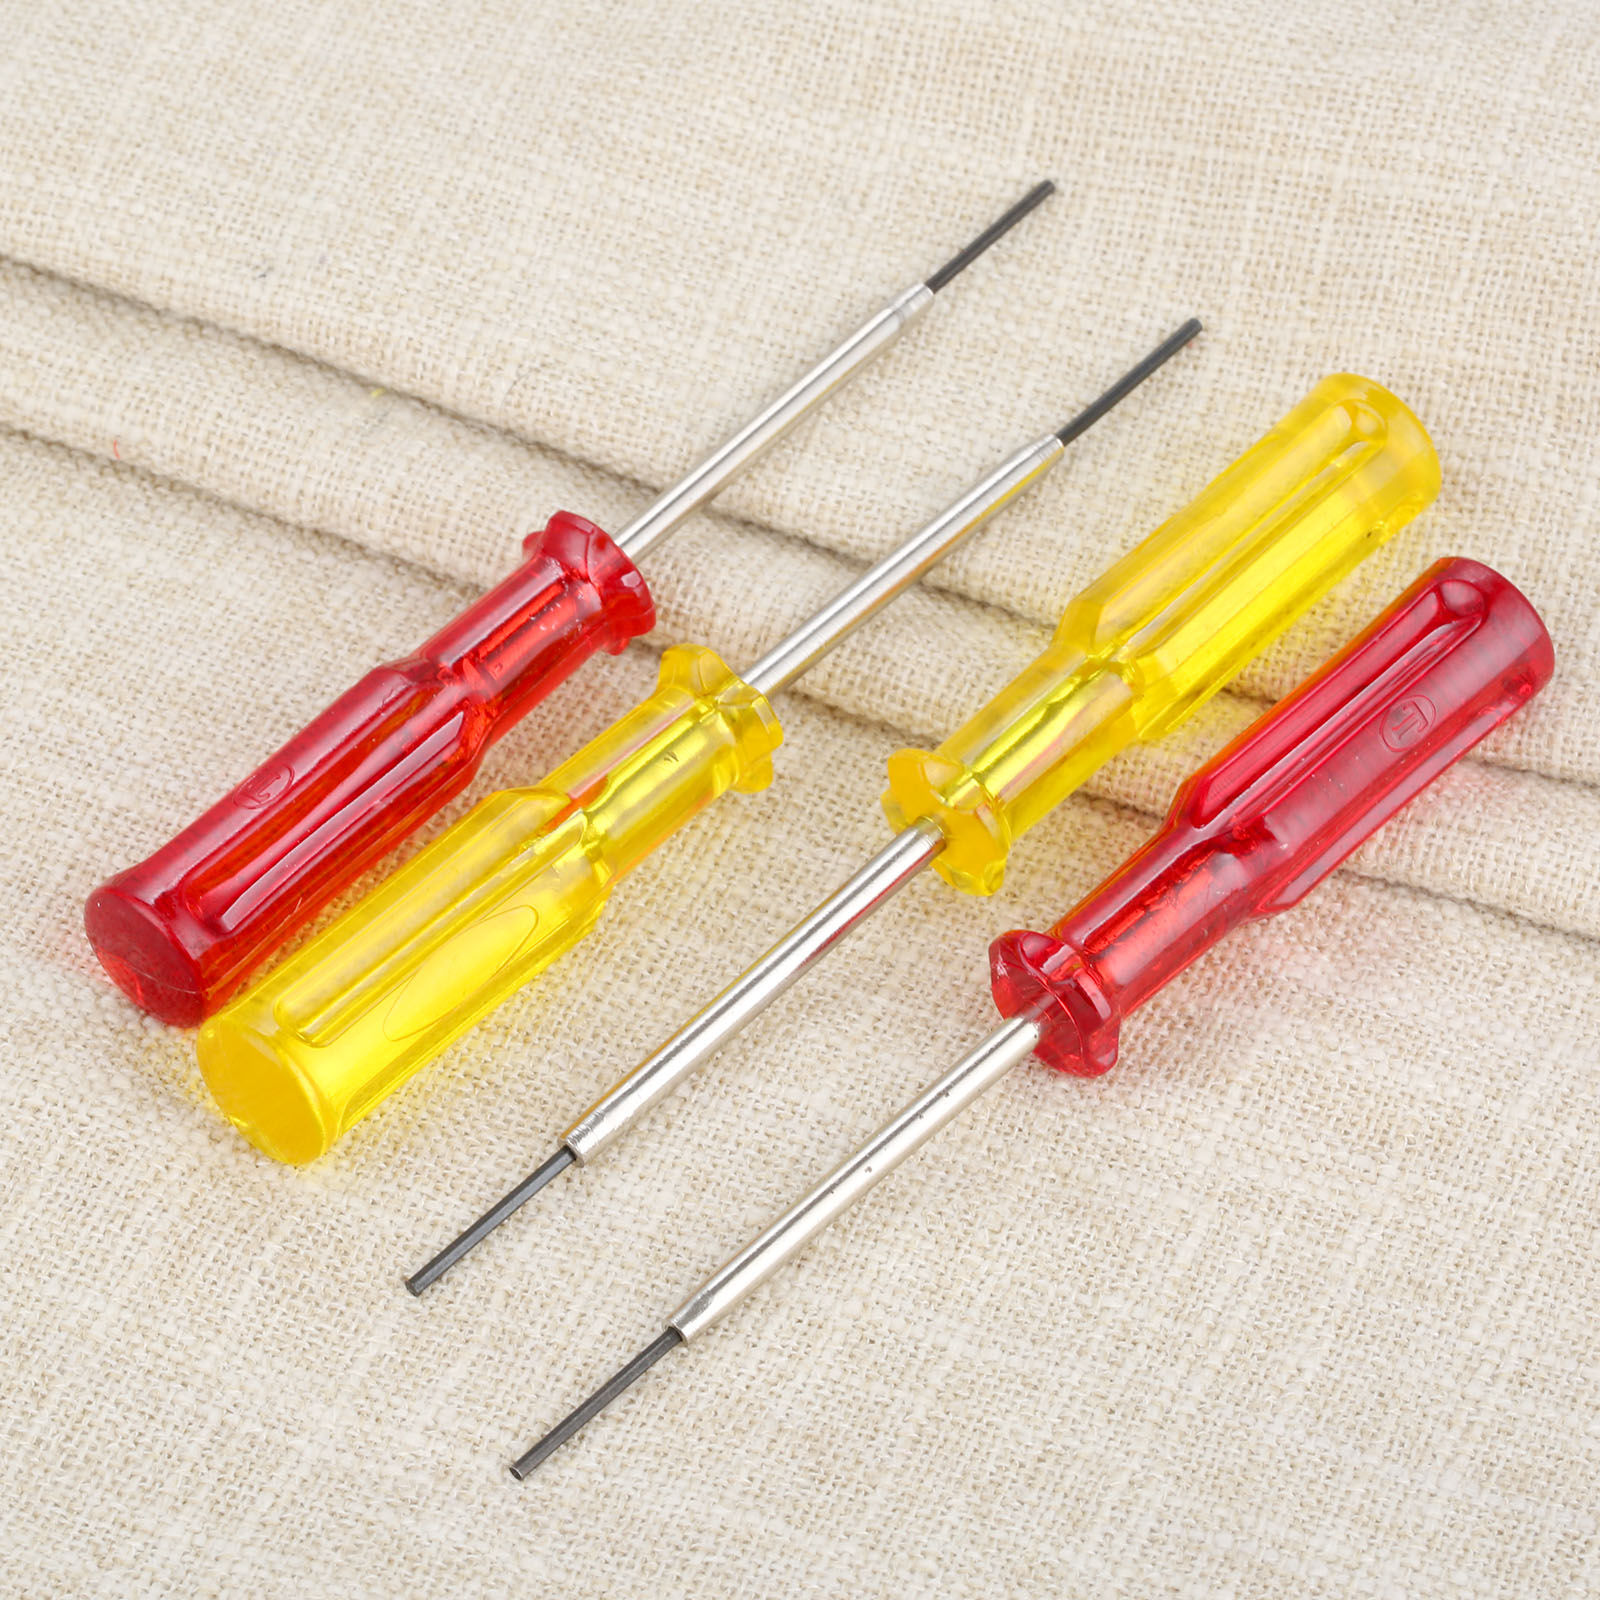 2Pcs 1.5mm/1.6mm Industrial Overlock Sewing Machine Inner Six Angle Screwdrivers Sewing Tools & Accessory Hexagonal Screw Driver